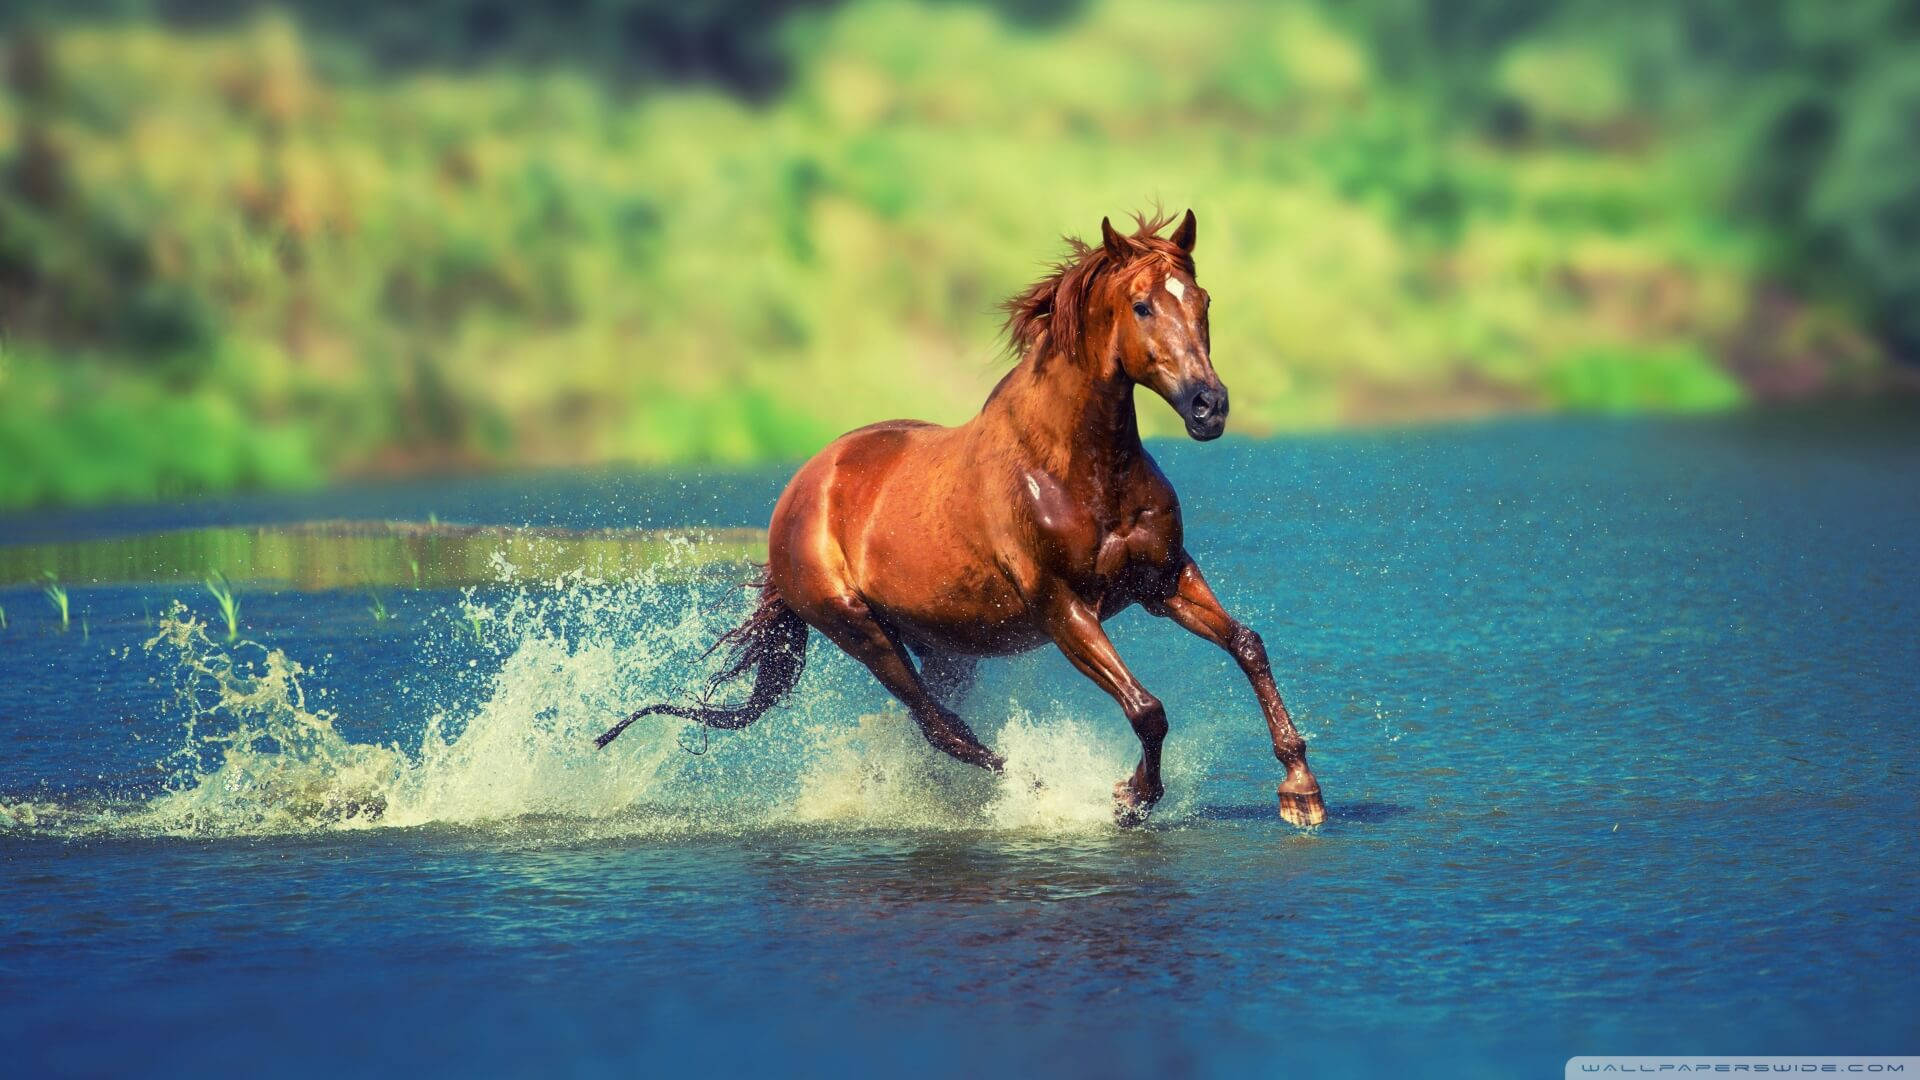 Chestnut Horse Galloping In Water Background